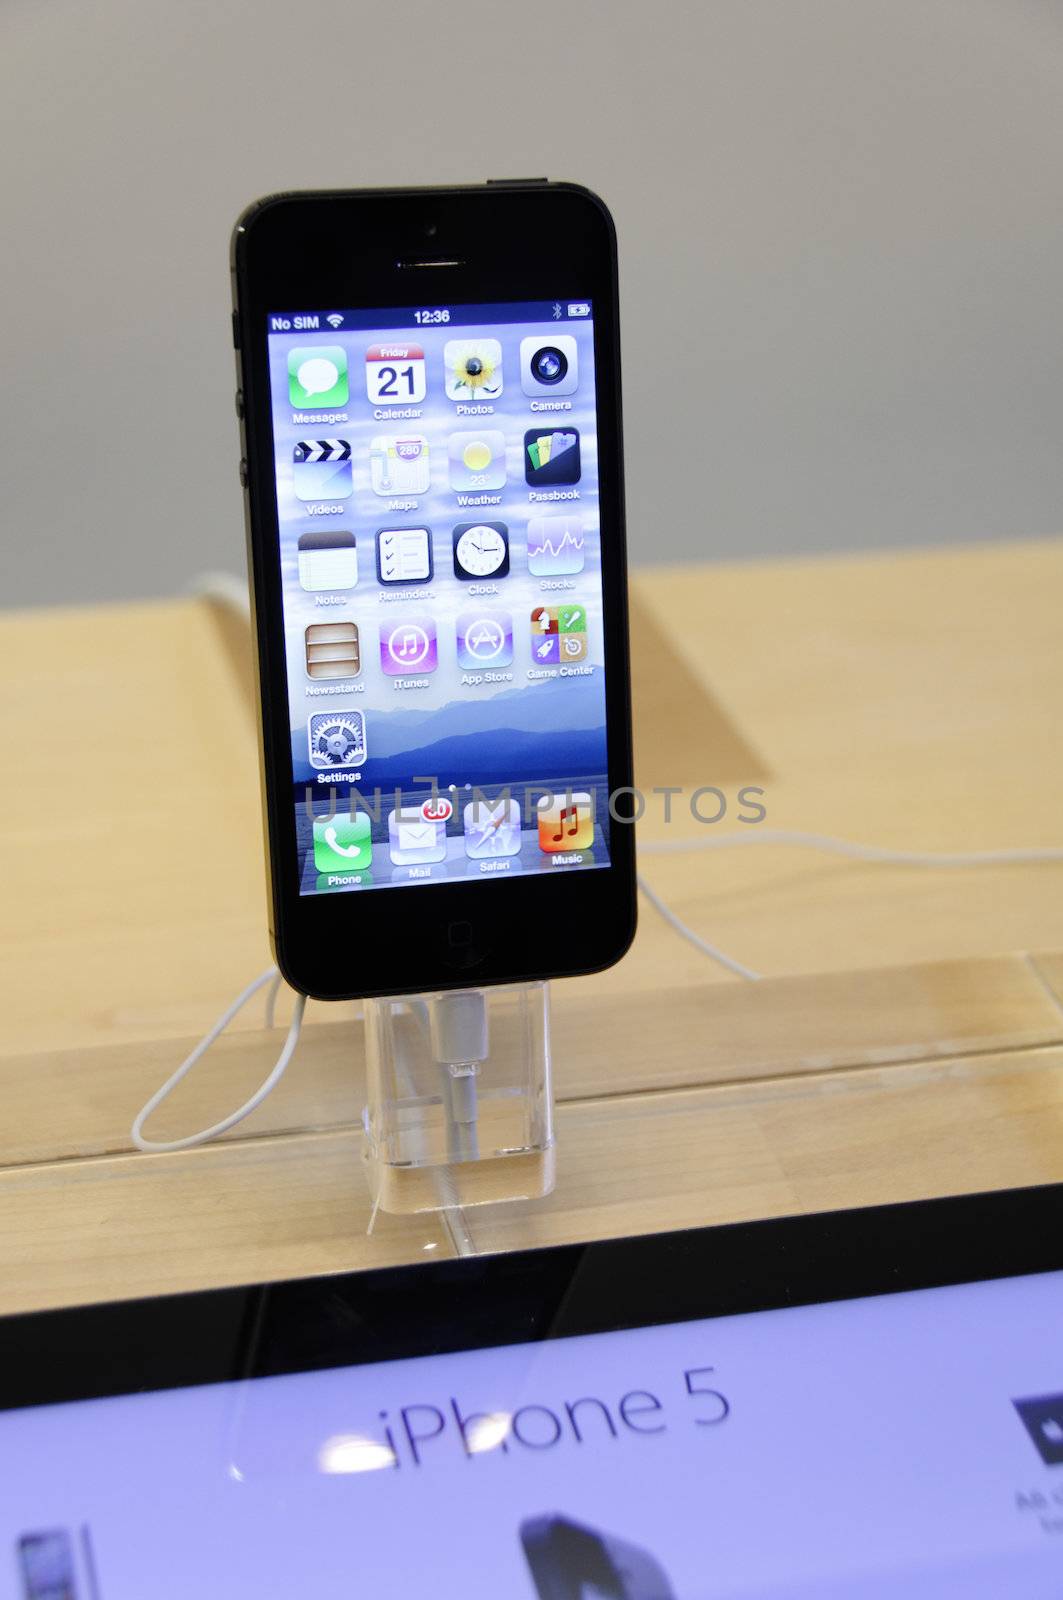 LONDON, UK, Friday September 21, 2012. The iPhone 5 goes on sale at the Apple Store on Regent Street.